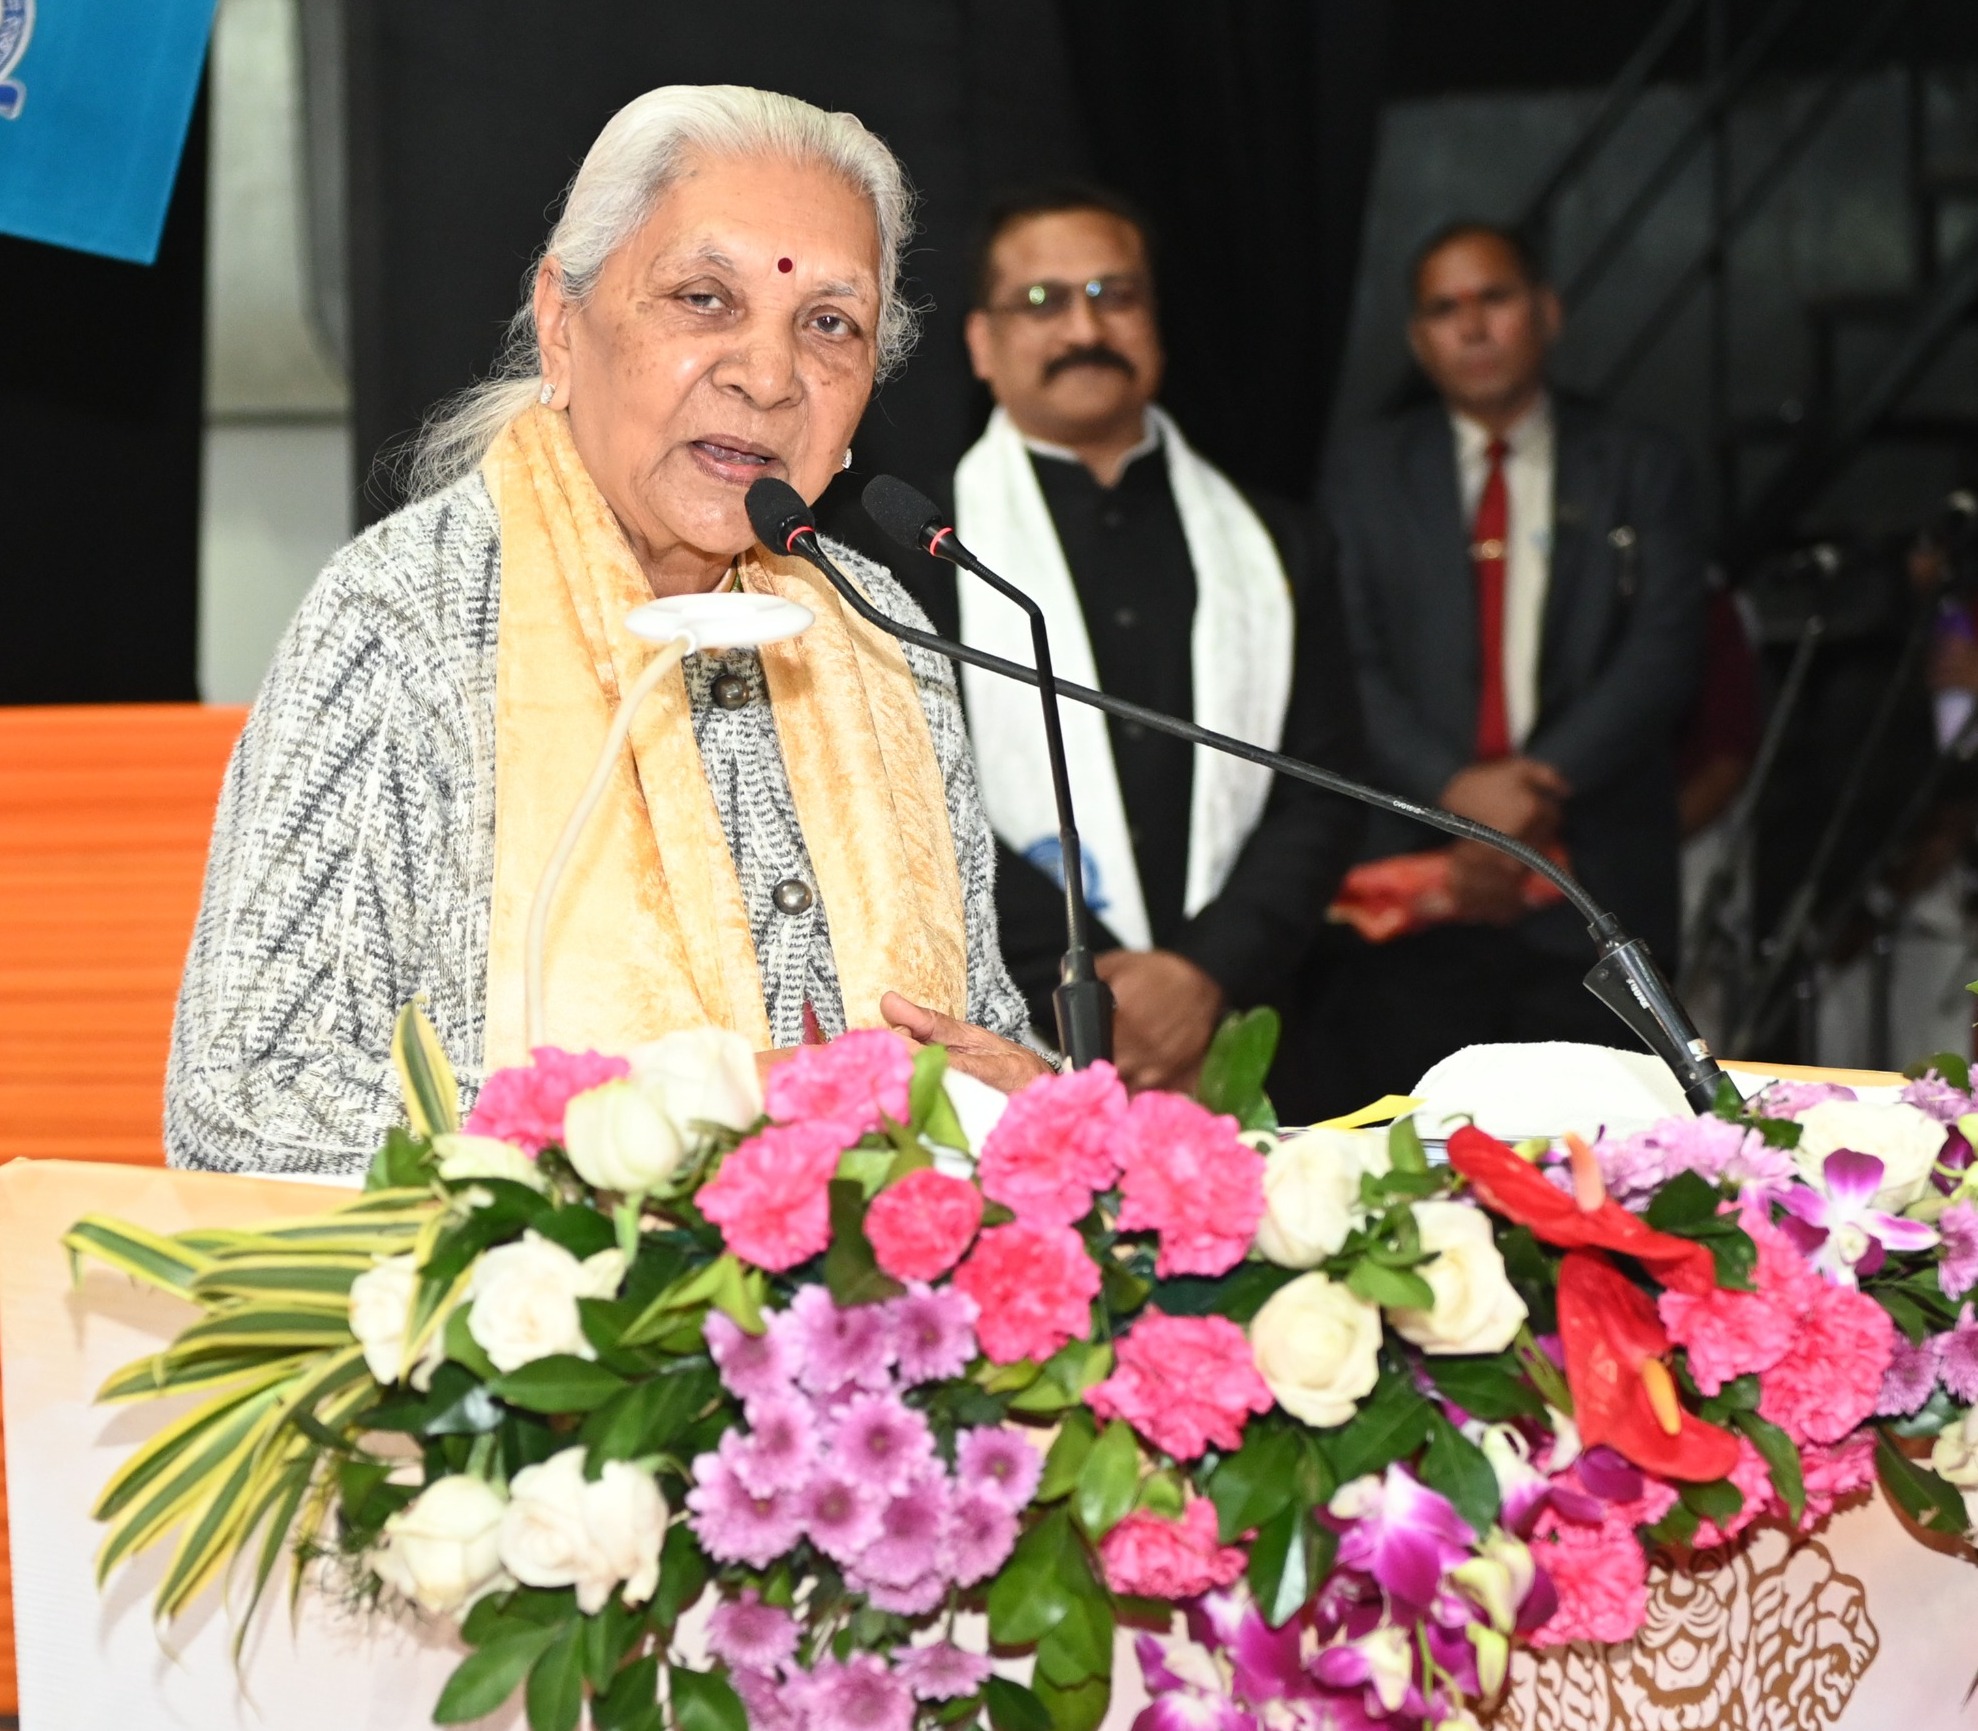 The first convocation ceremony of Dr. Ram Manohar Lohia Institute of Medical Sciences, Lucknow concluded under the chairmanship of the Governor.